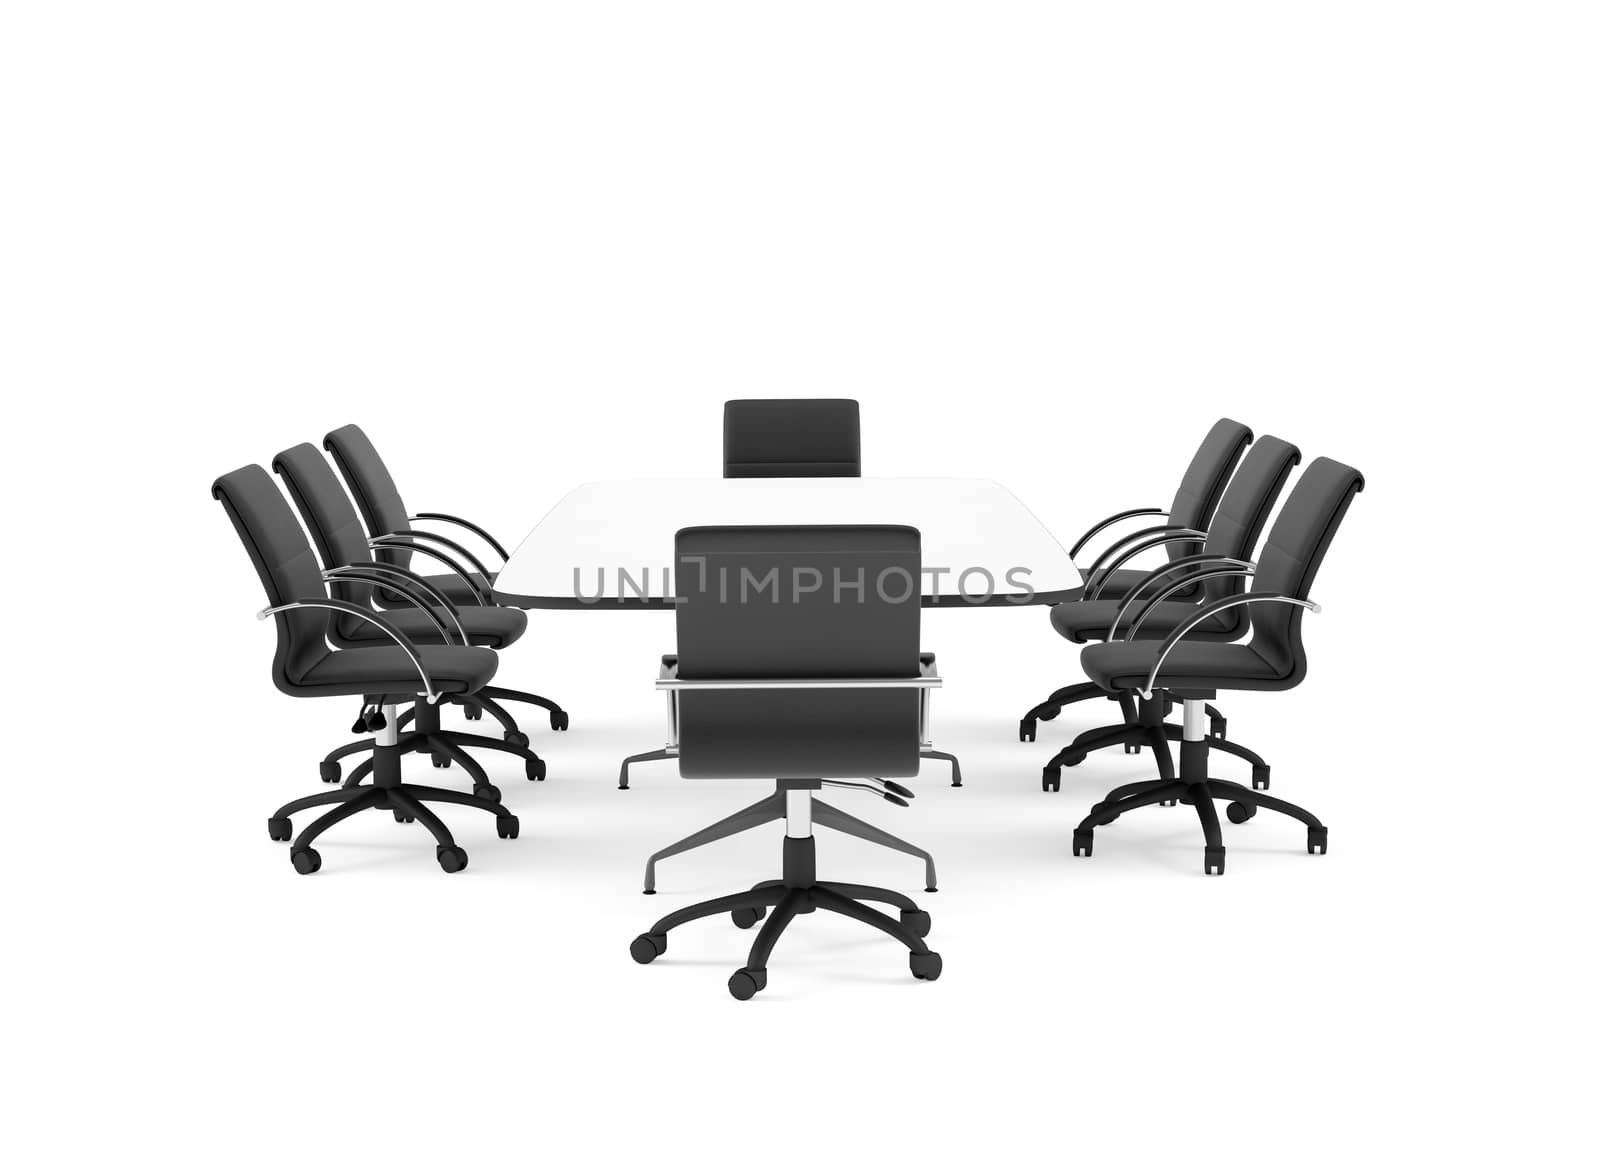 Conference table and chairs. Isolated render on white background